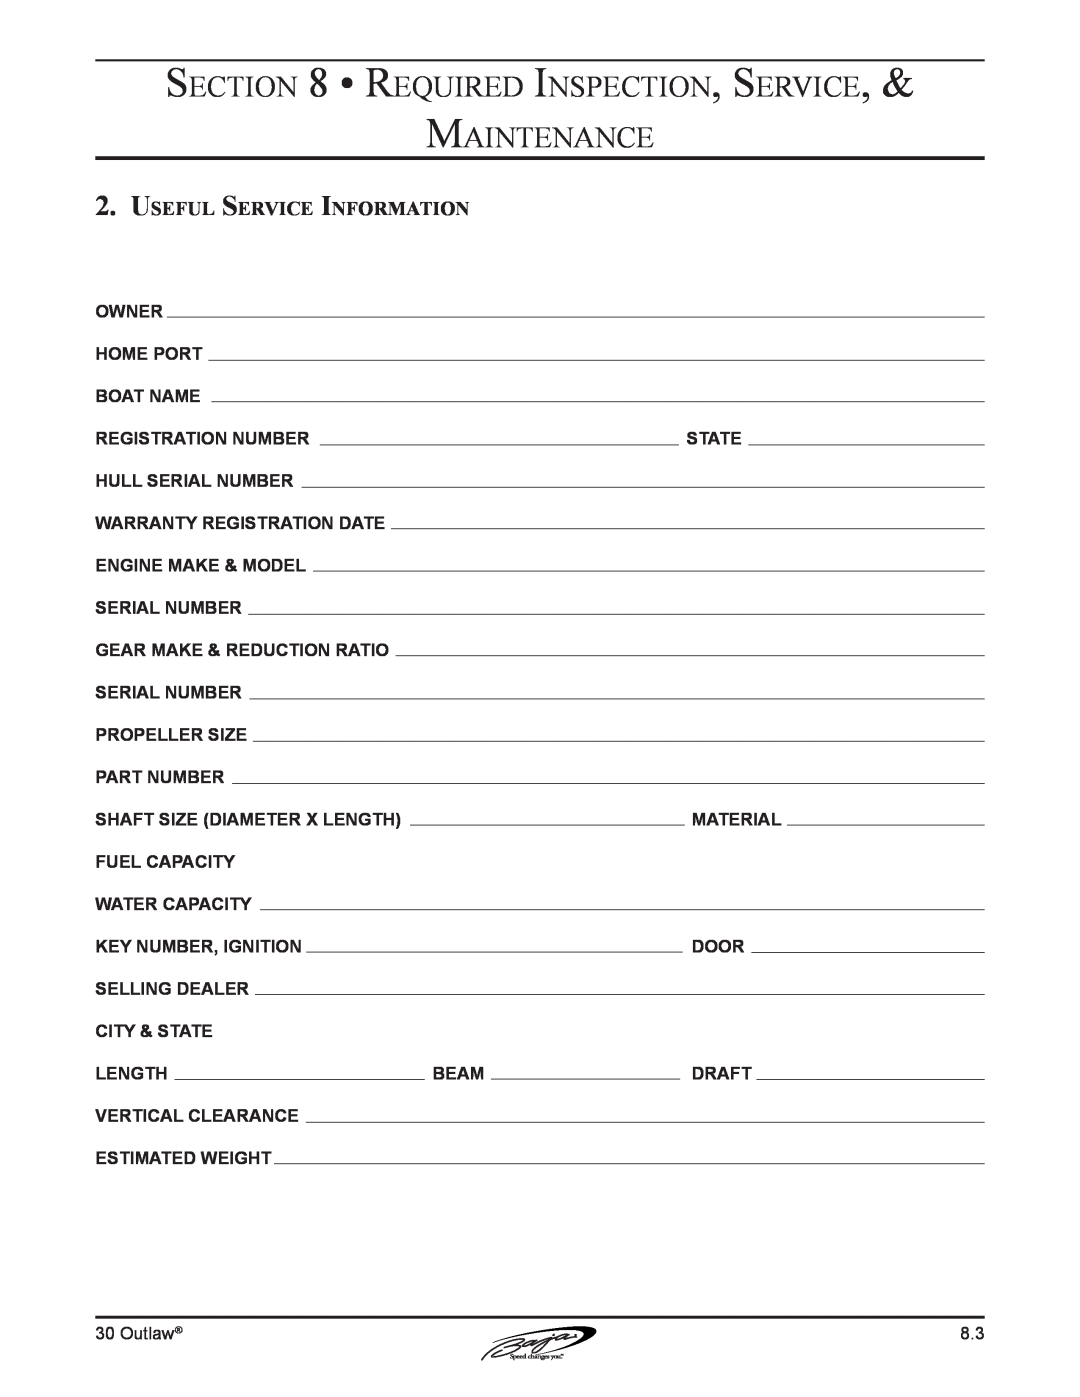 Baja Marine 30 manual Required Inspection, Service Maintenance, Useful Service Information 